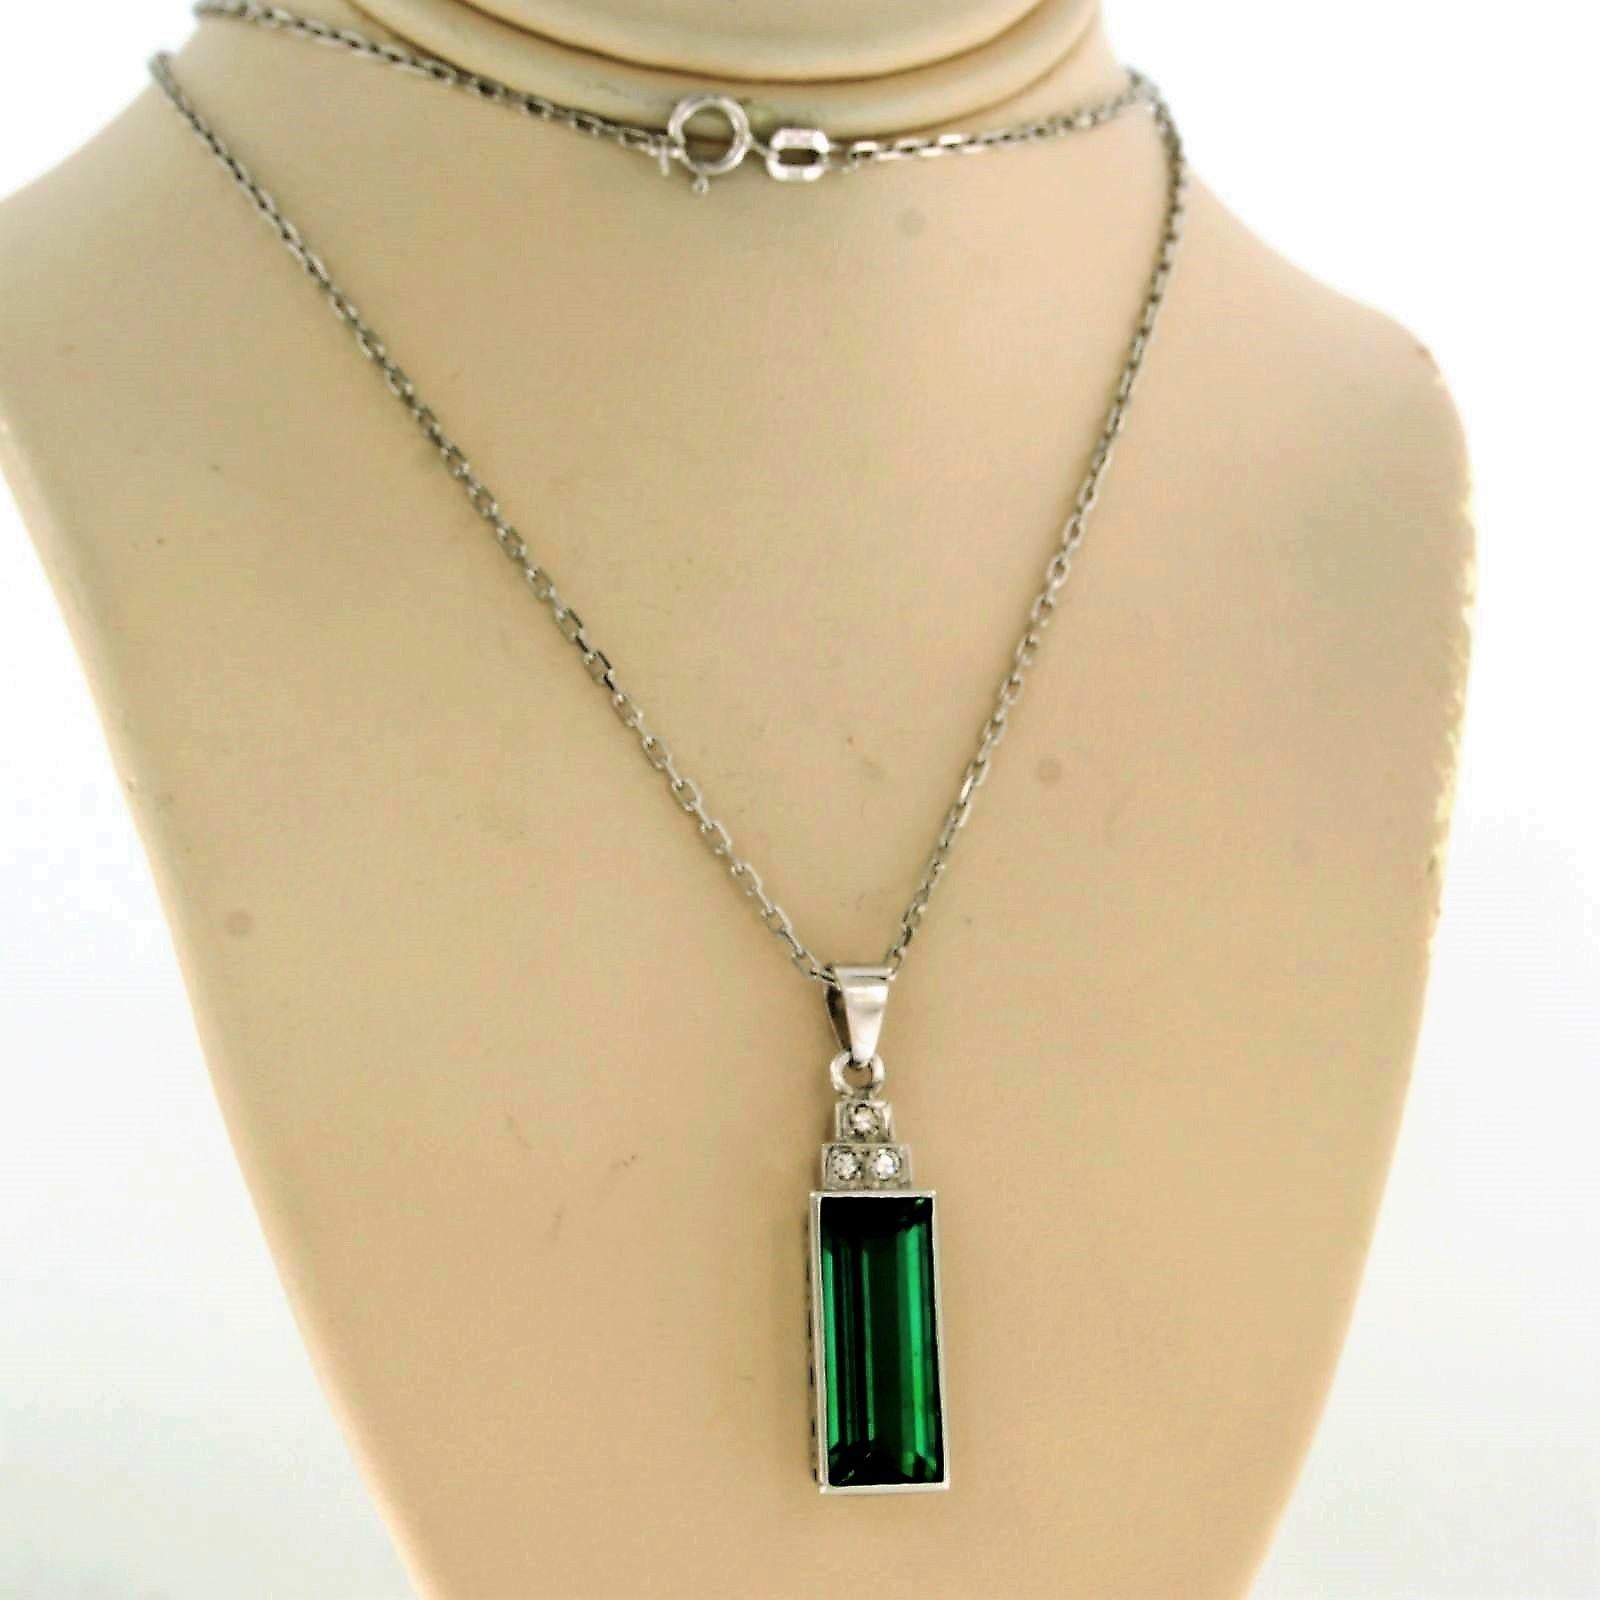 14 kt white gold necklace with pendant set with tourmaline 3.00 ct and single cut diamond 0.12 ct F/G VS/SI - 50 cm

detailed description:

the necklace is 50 cm long and 1.0 mm wide

the pendant is 3.3 cm long by 8.2 mm wide

weight 5.8